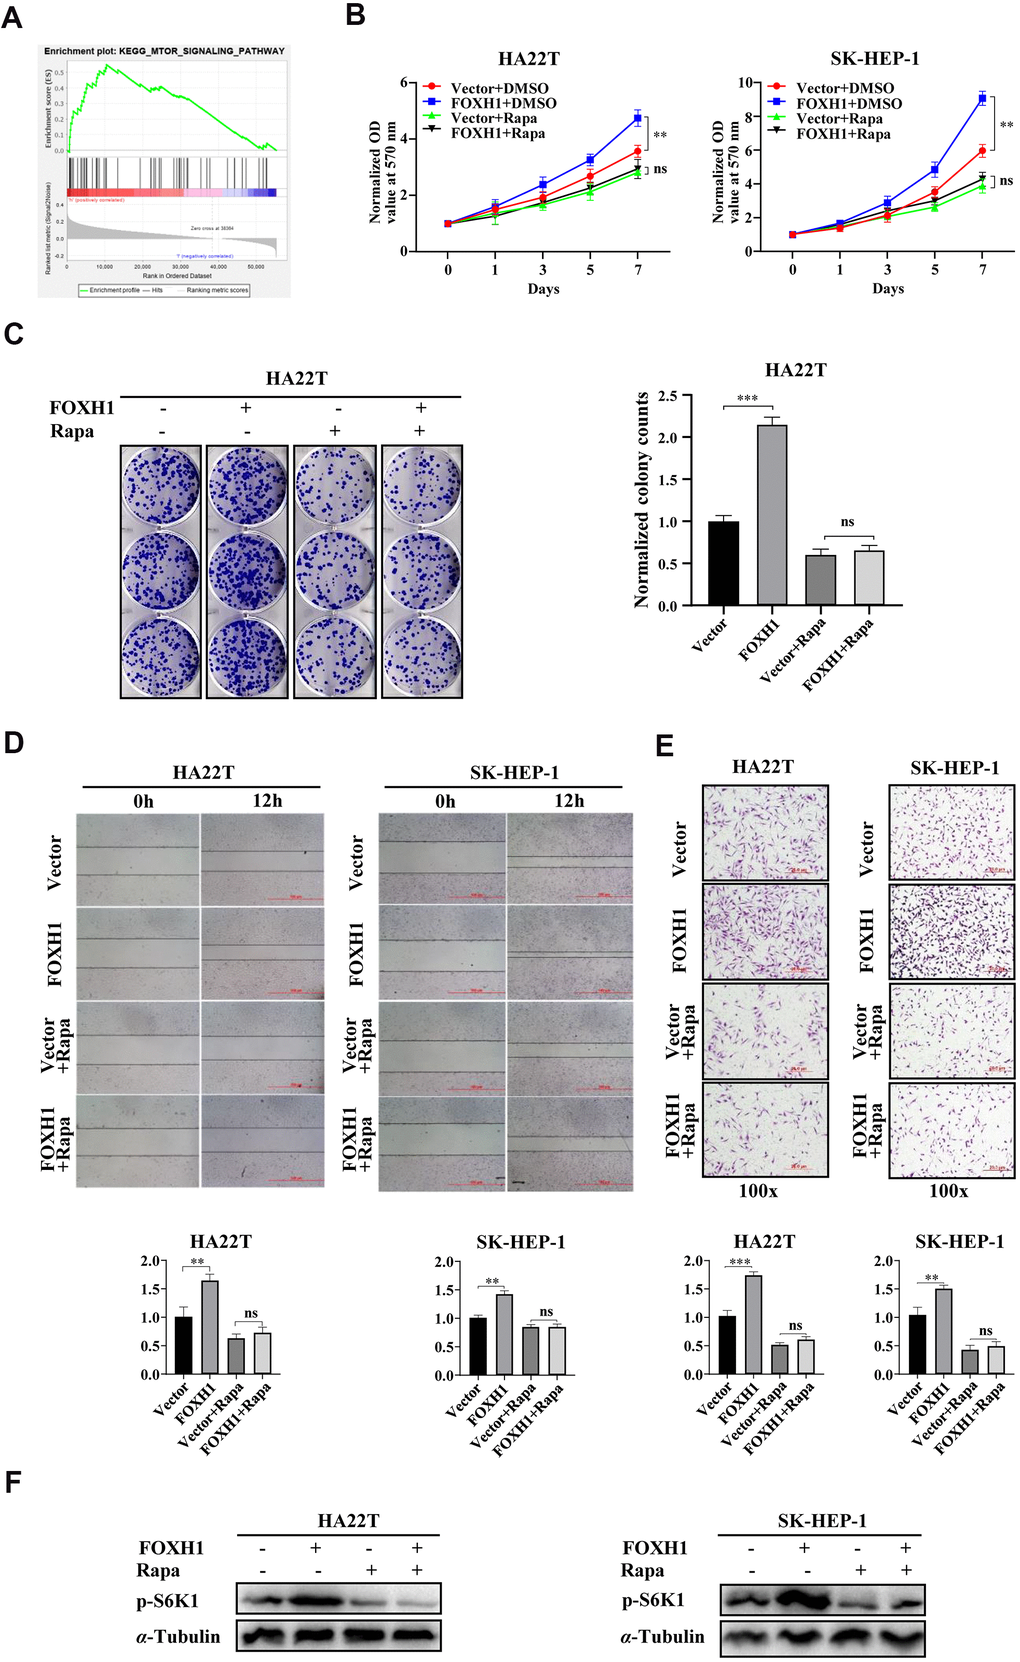 FOXH1 mediated cell growth and cell migration/cell invasion of HCC cells were dependent of mTOR signaling. (A) GSEA KEGG analysis showed that mTOR signaling was enriched in high FOXH1 HCC patients. (B) FOXH1 mediated cell growth of HA22T and SK-HEP-1 cells was blocked by mTOR inhibitor rapamycin (Rapa). (C) Colony formation assay showed that FOXH1 induced cell growth of HA22T cells was attenuated by rapamycin. Left, representative images of colonies. Right, statistical analysis. (D) FOXH1 lost the ability to increase cell migration of HA22T and SK-HEP-1 cells in the presence of rapamycin. Top, representative images of wounding healing assay. Bottom, statistical analysis. (E) FOXH1 failed to increase cell invasion of HA22T and SK-HEP-1 cells in the presence of rapamycin. Top, representative images of invading cells. Bottom, statistical analysis. (F) FOXH1 induced phosphorylation levels of S6K1 were blocked by rapamycin. GAPDH served as loading control. *P**P***P